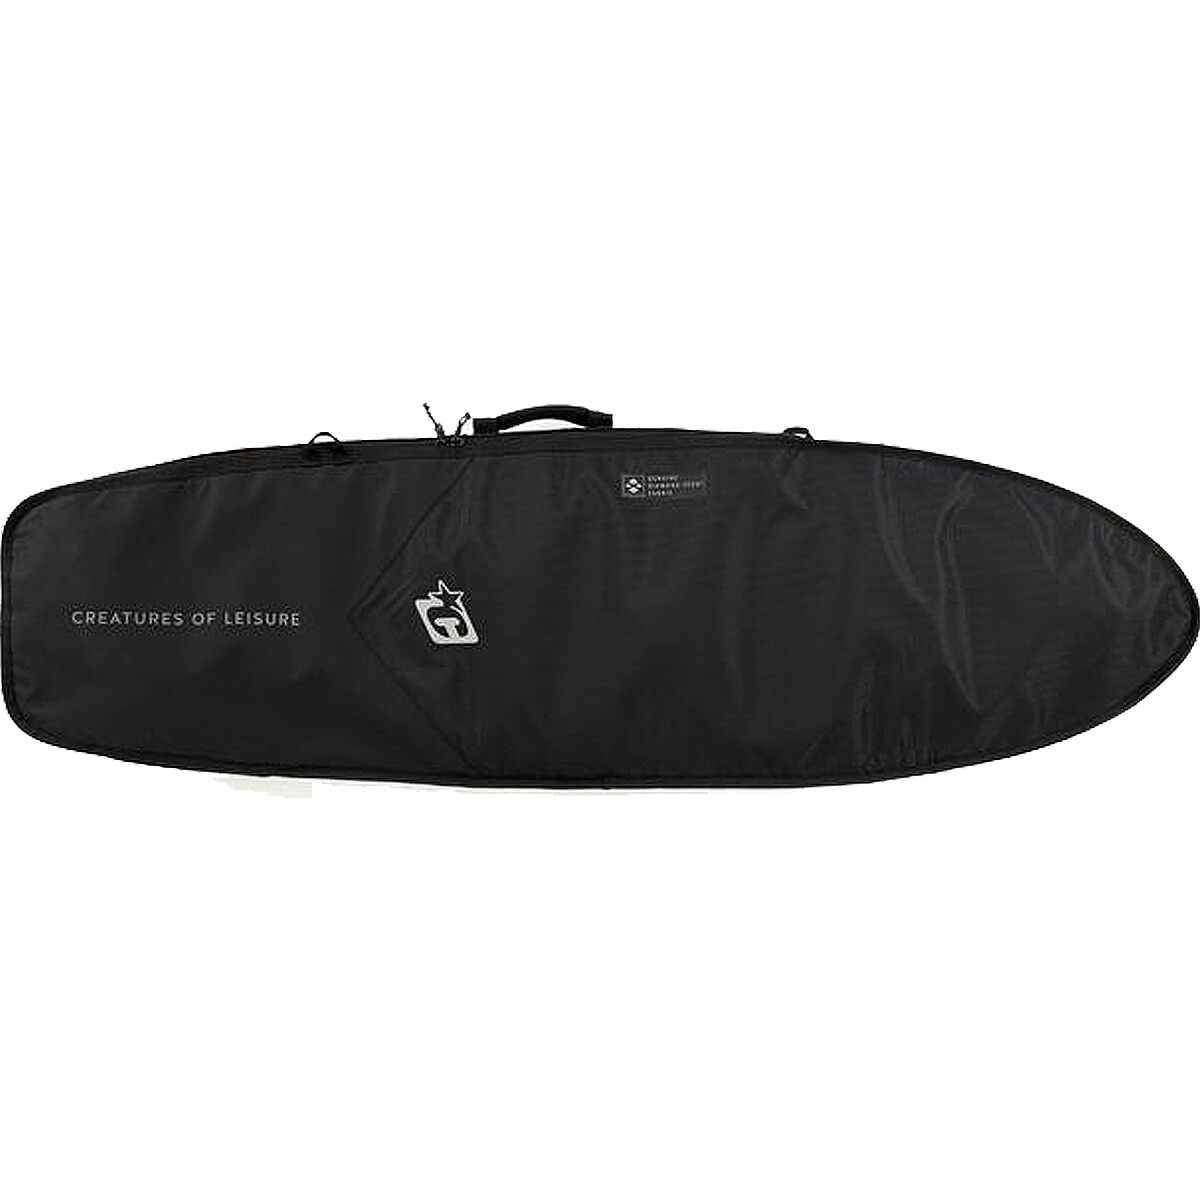 Creatures of Leisure Fish Travel DT 2.0 Surfboard Bag